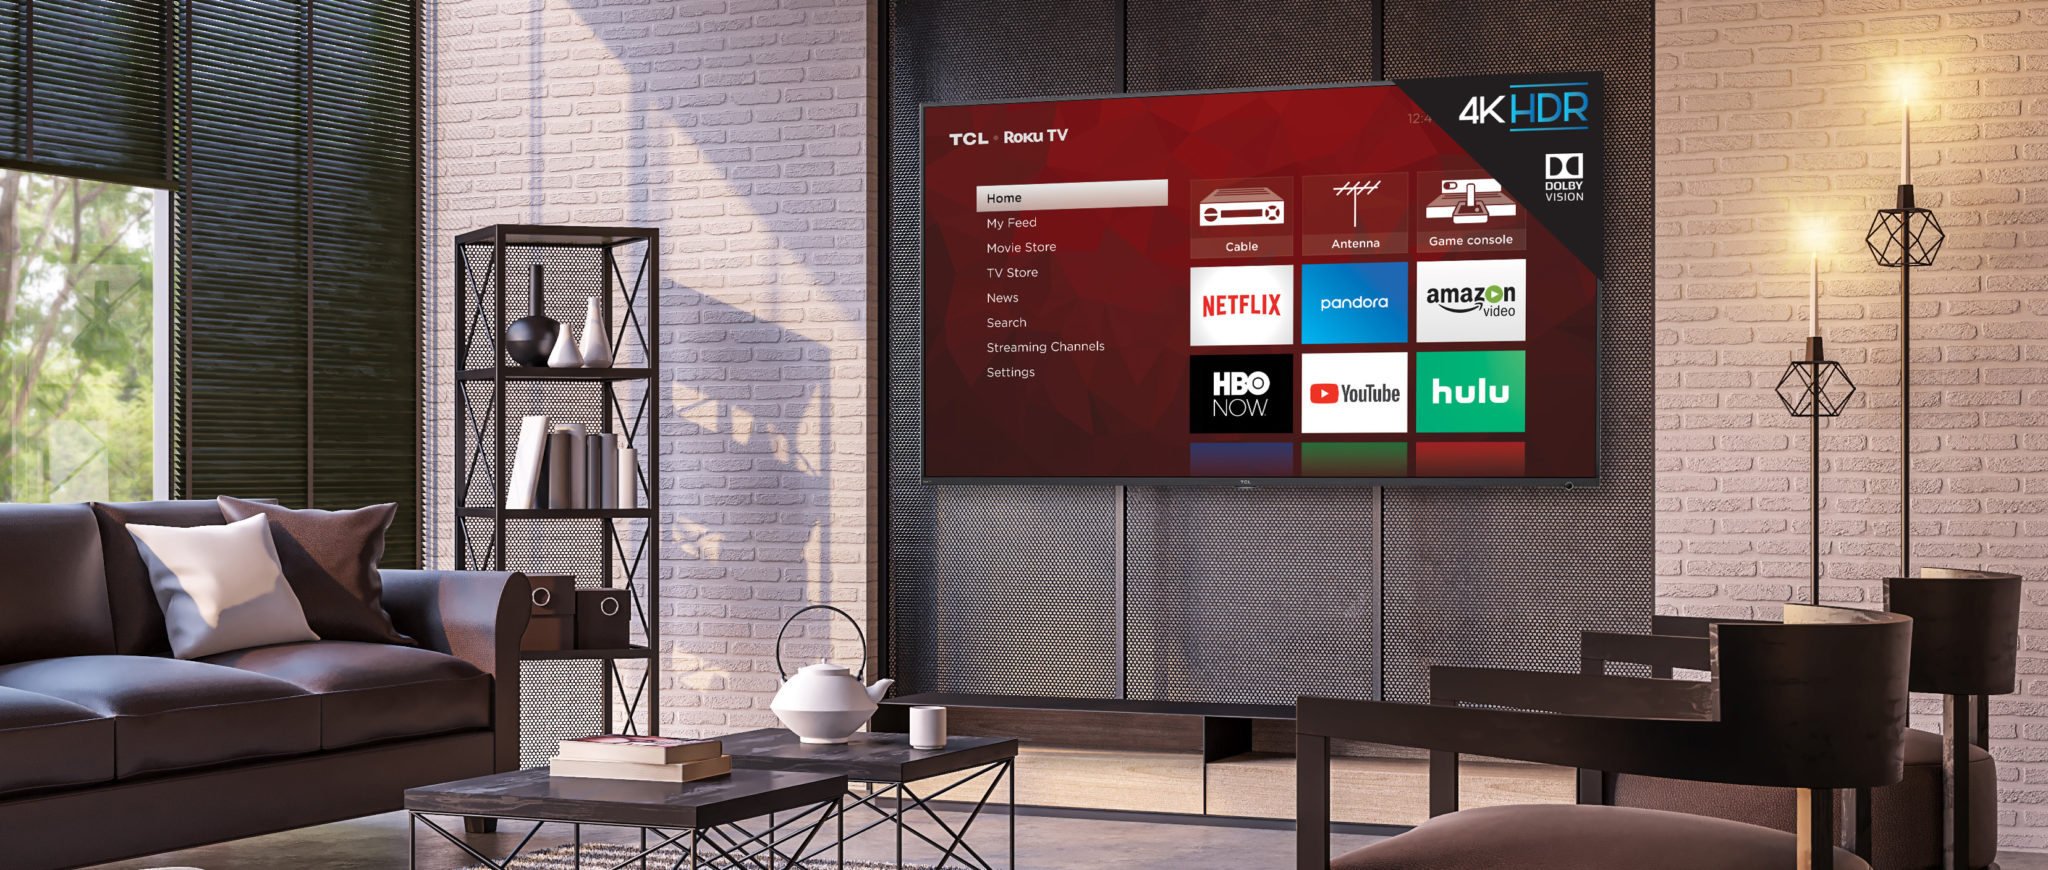 Giveaway: Enter Now For a Chance to Win a 65″ 4K HDR Roku TV From TCL, Antennas Direct Antenna, & a $100 Sling TV Gift Card (Ends Monday)